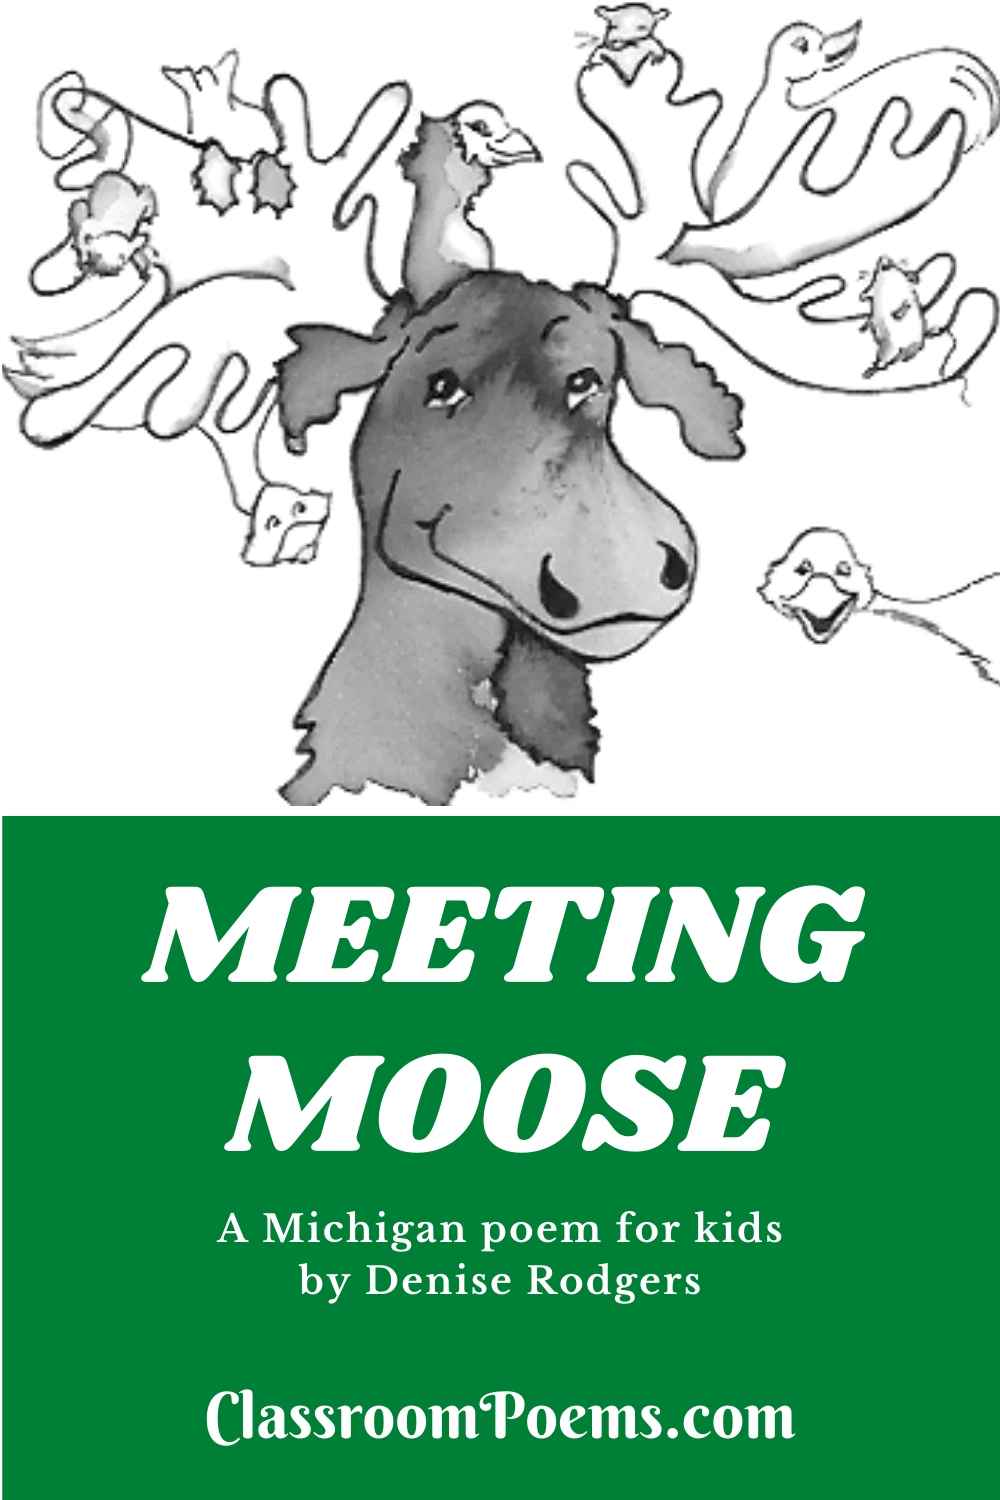 Moose drawing and poem by Denise Rodgers of ClassroomPoems.com.